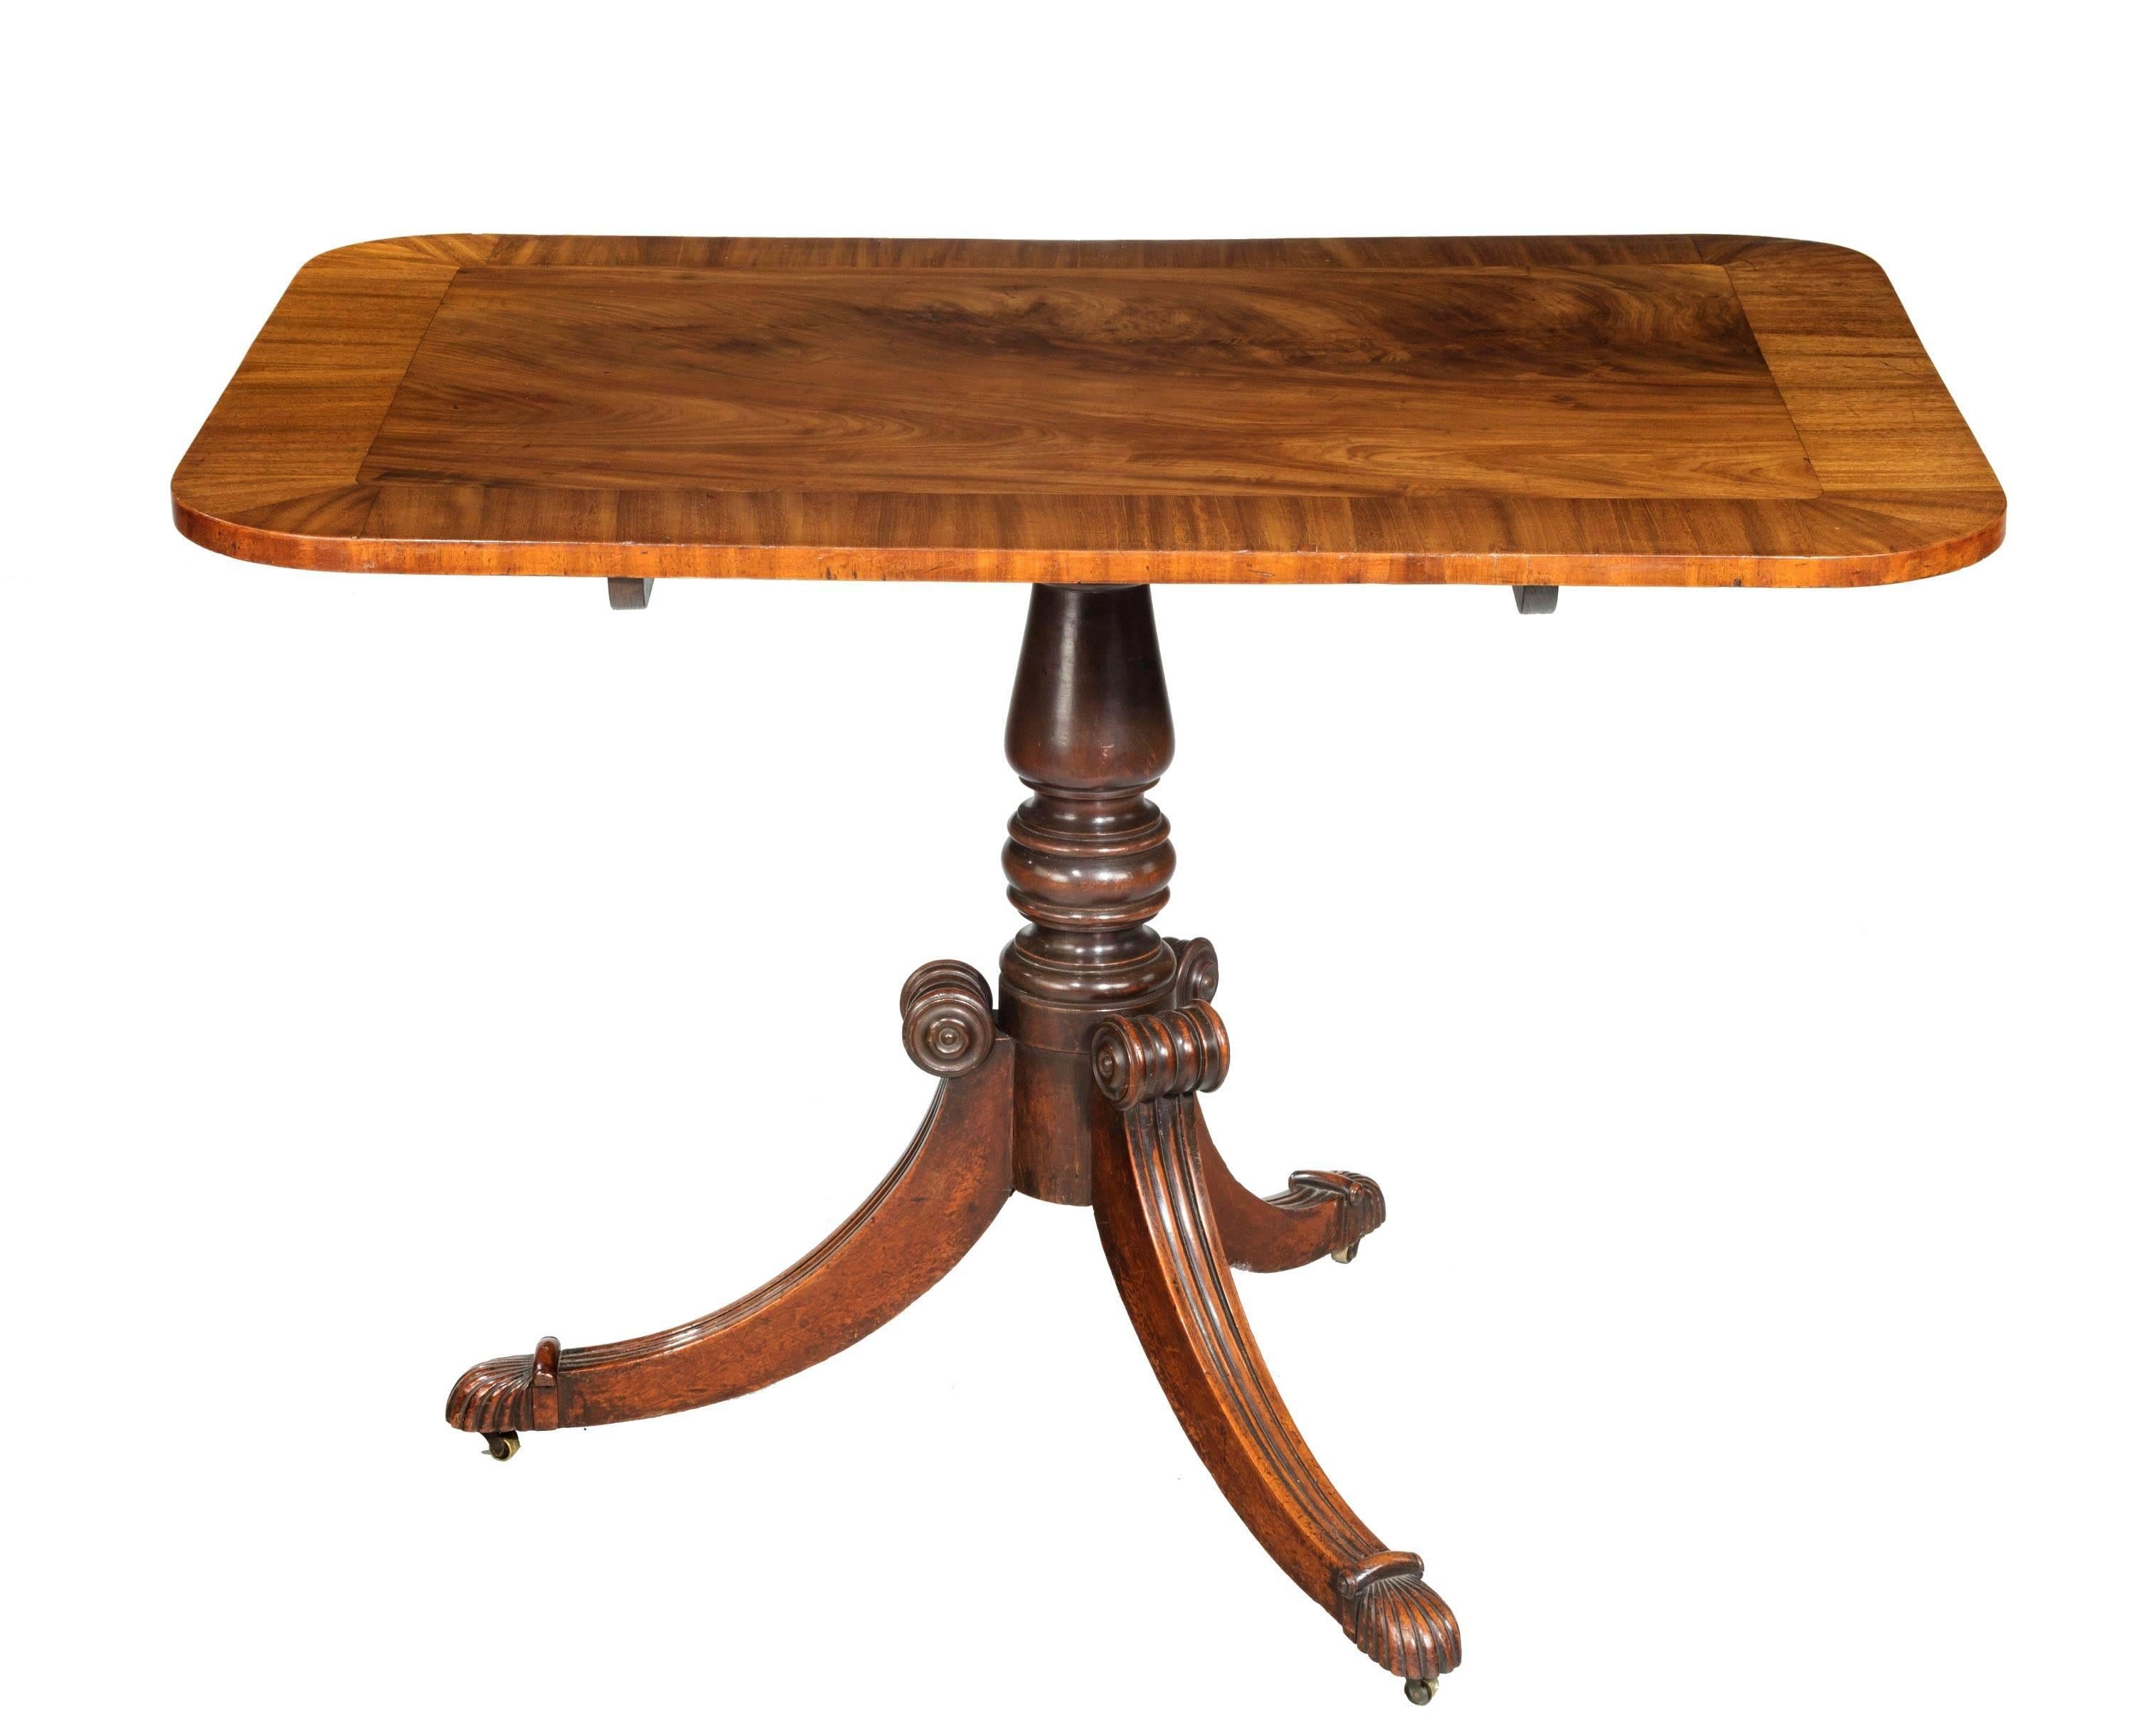 A particularly beautifully figured George III period mahogany small breakfast table. The top with large crossbanded edging. On a turned central support with reeded sabre legs. Excellent overall condition.